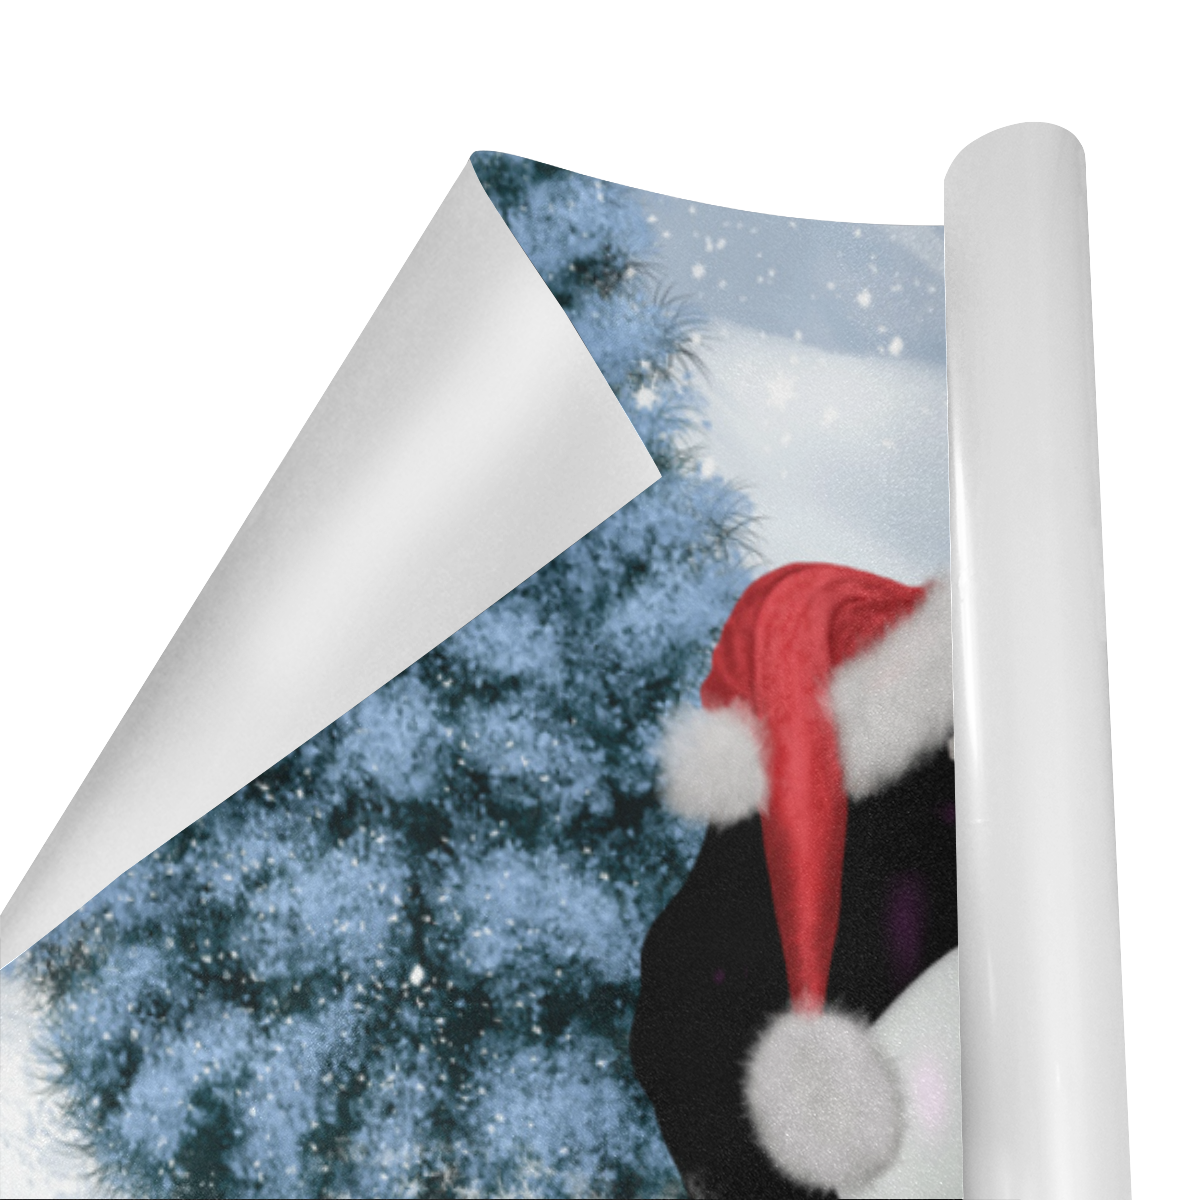 Christmas, funny, cute penguin Gift Wrapping Paper 58"x 23" (5 Rolls)